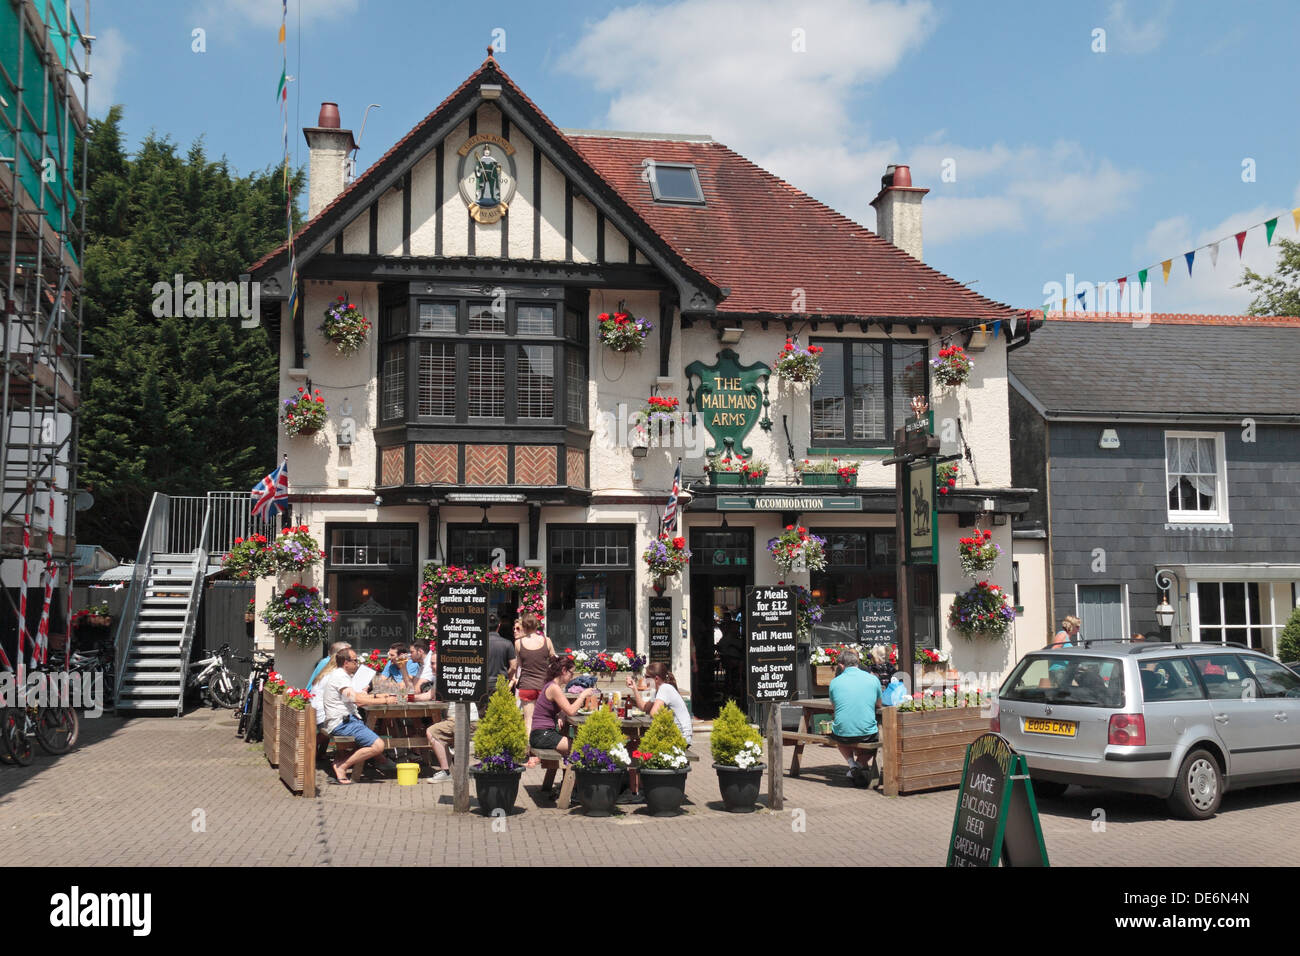 The Mailmans Arms public house in Lyndhurst, New Forest, Hampshire, UK. Stock Photo